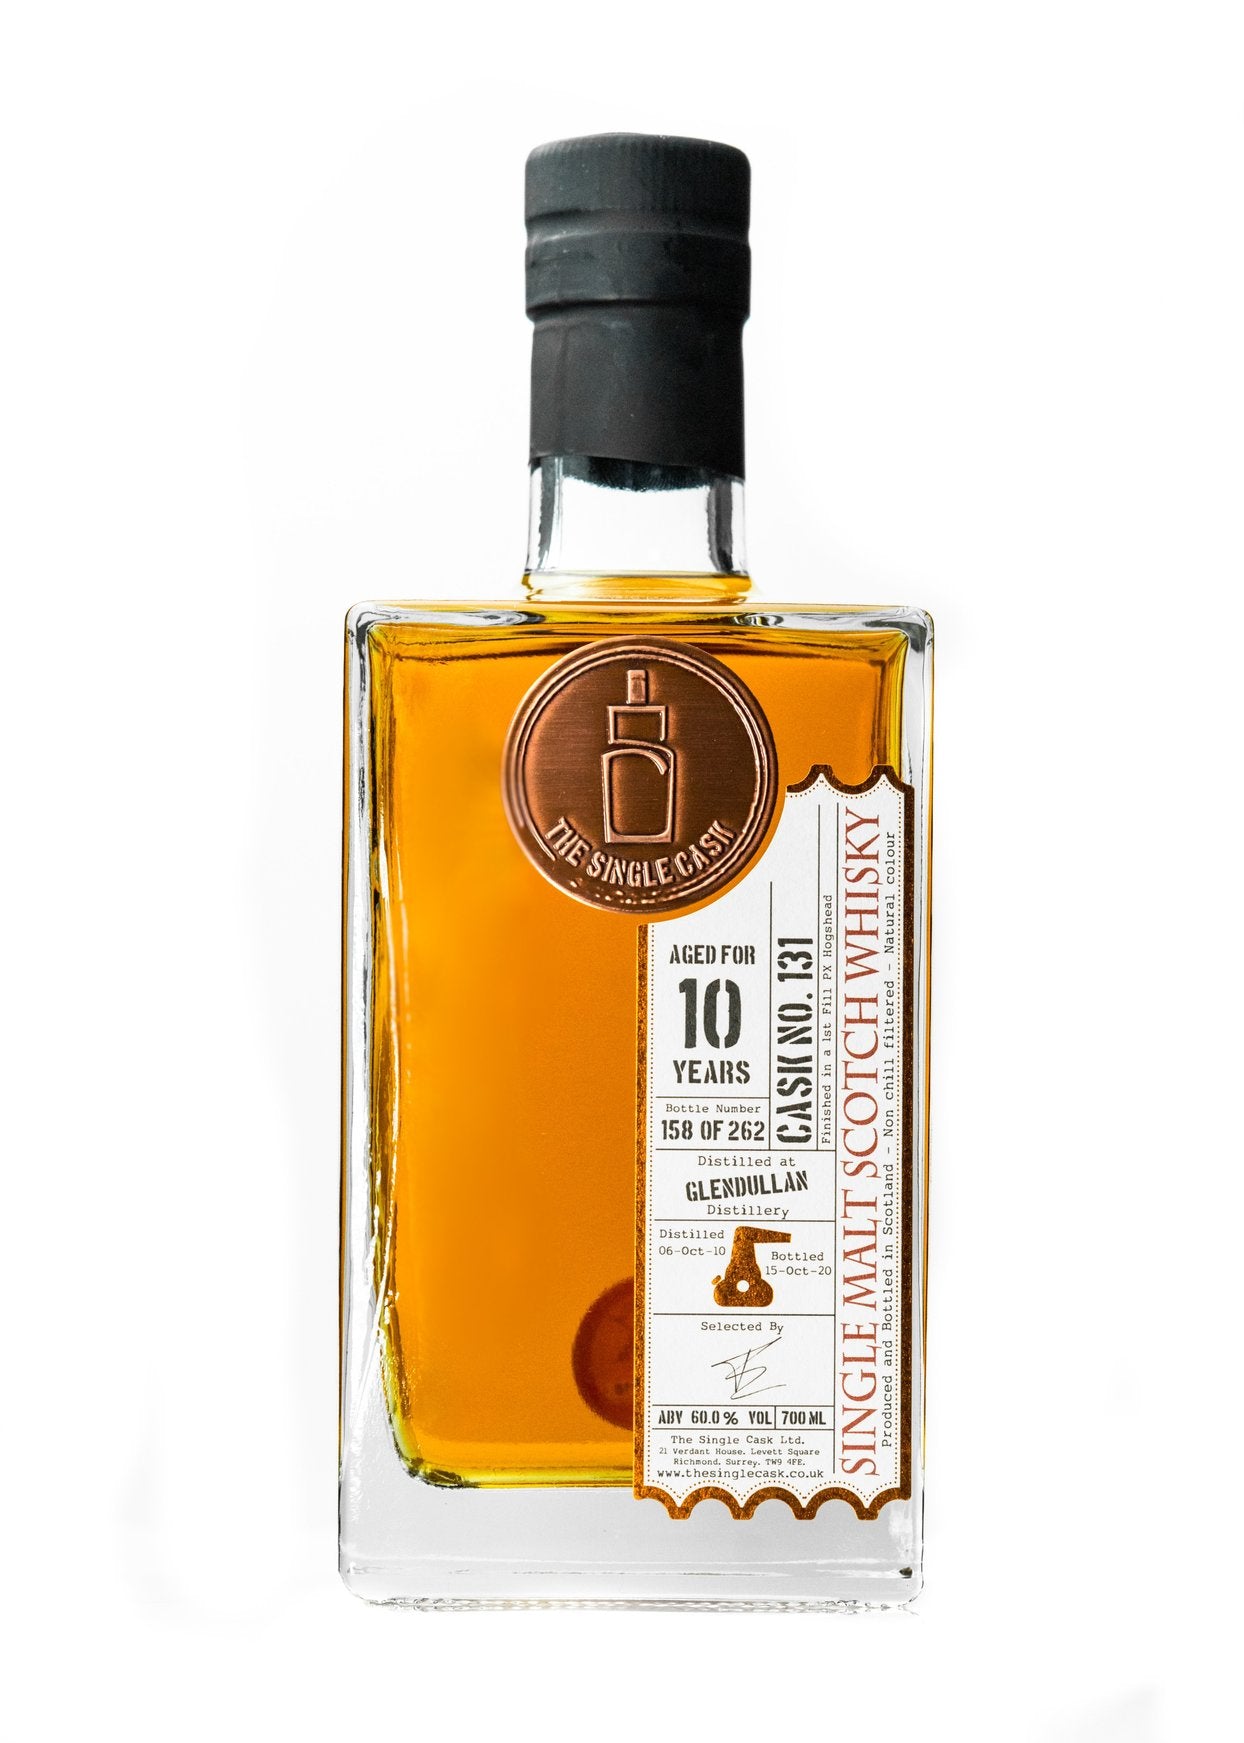 Glendullan 10 years old scotch whisky by The Single Cask